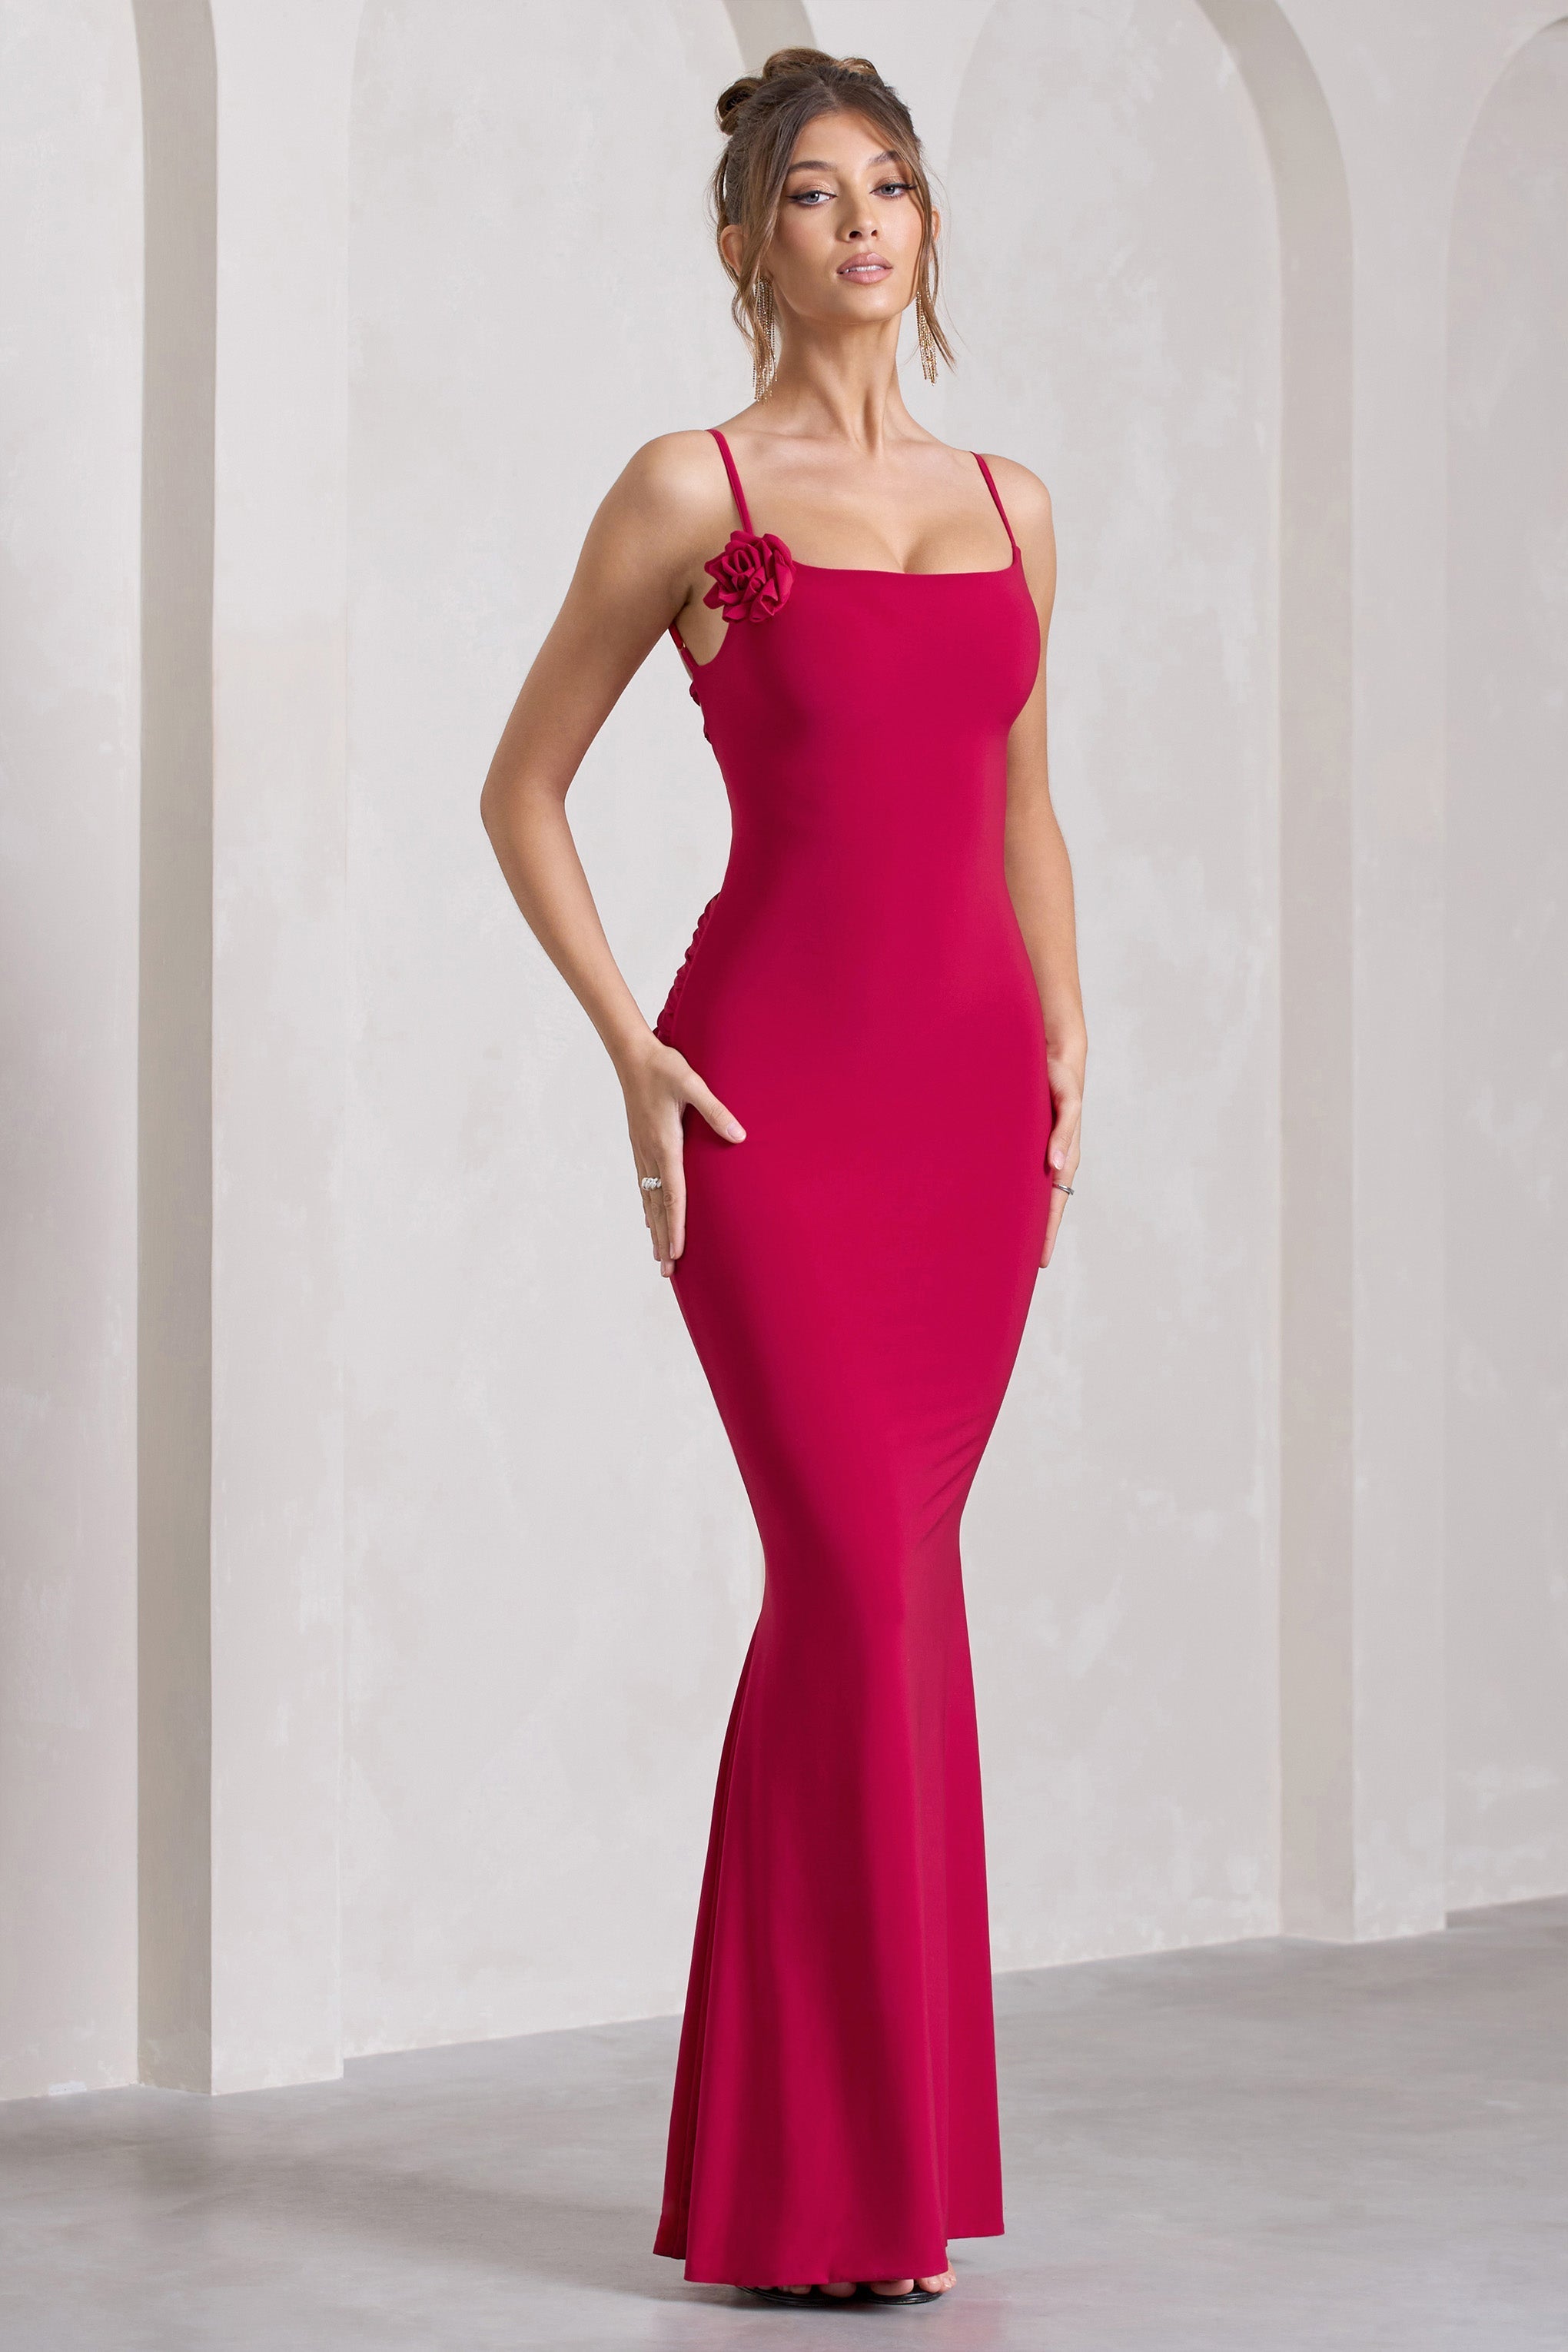 Alora Red Strappy Lace-Up Maxi Dress With Flower Corsage